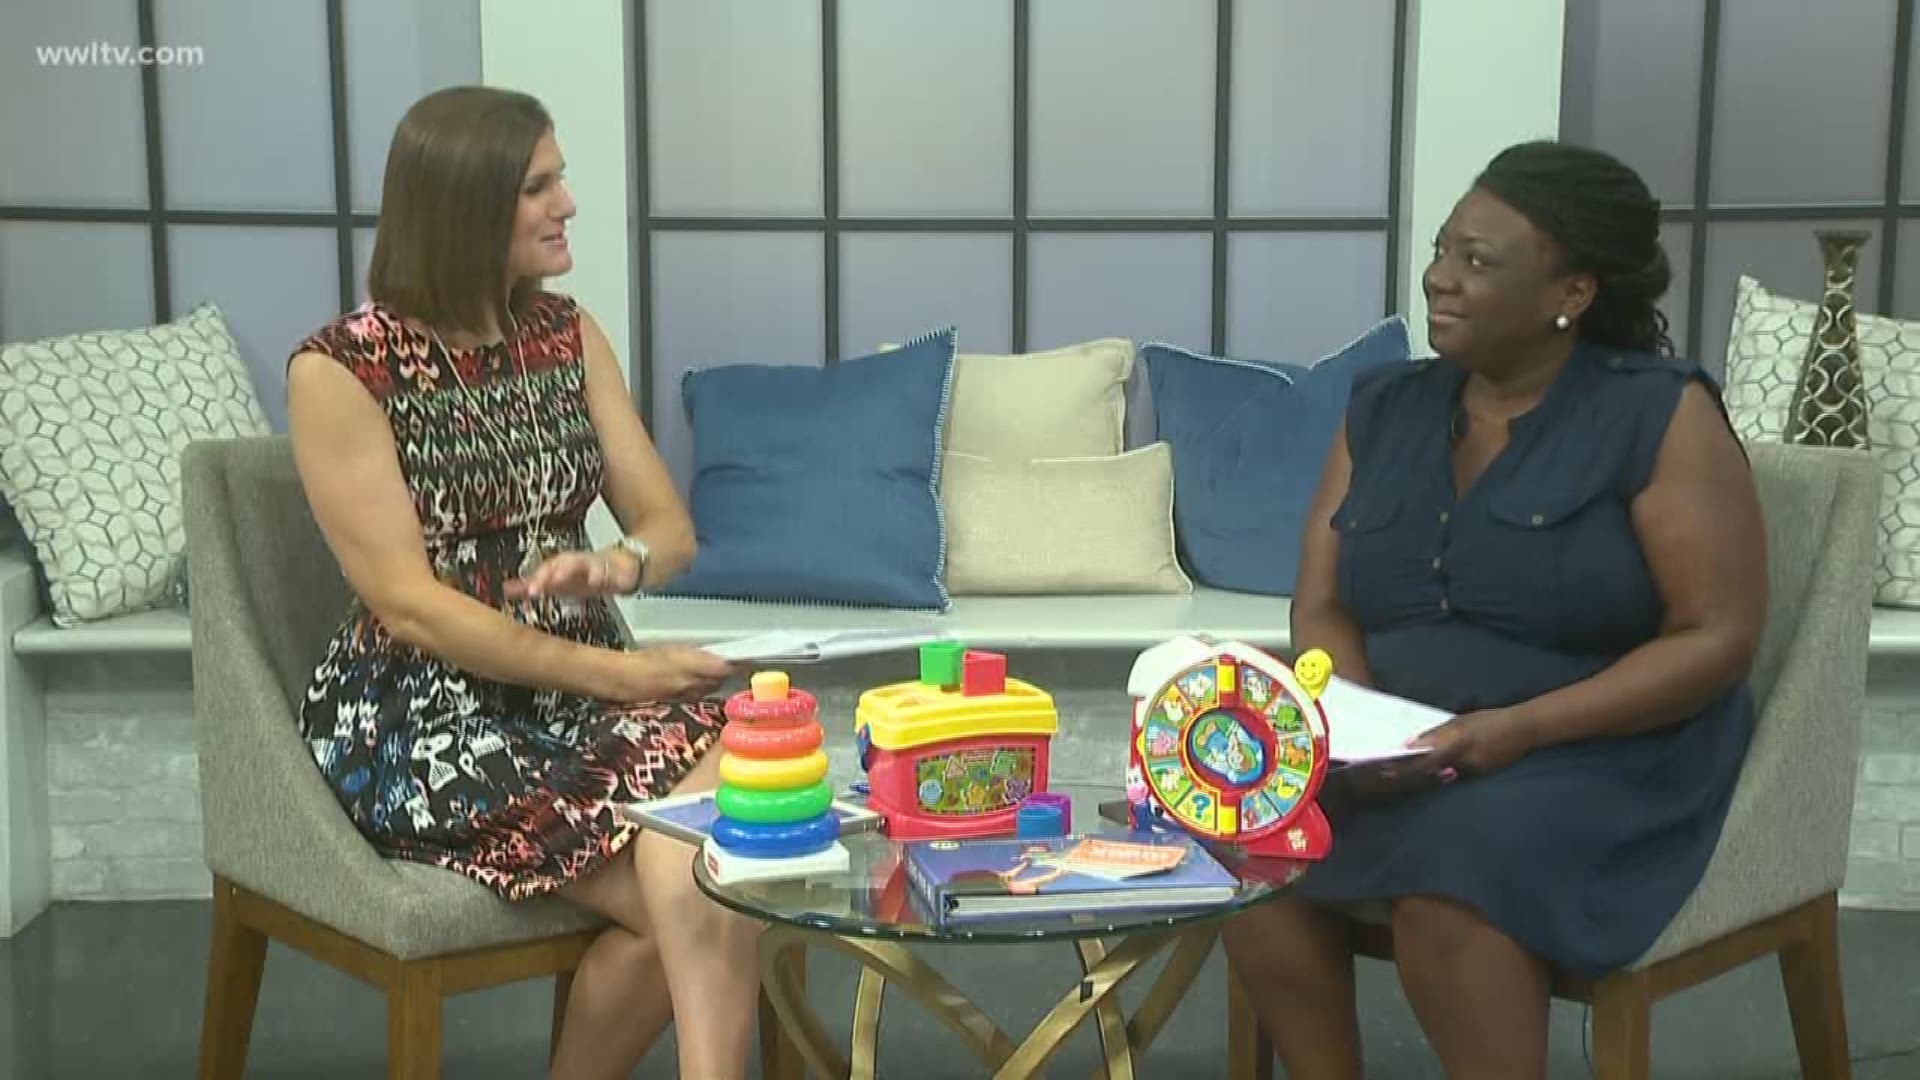 Shanelle Staten with the Parenting Center at Children's Hospital and Leslie Spoon discuss how best to engage children of all ages during the summer break.